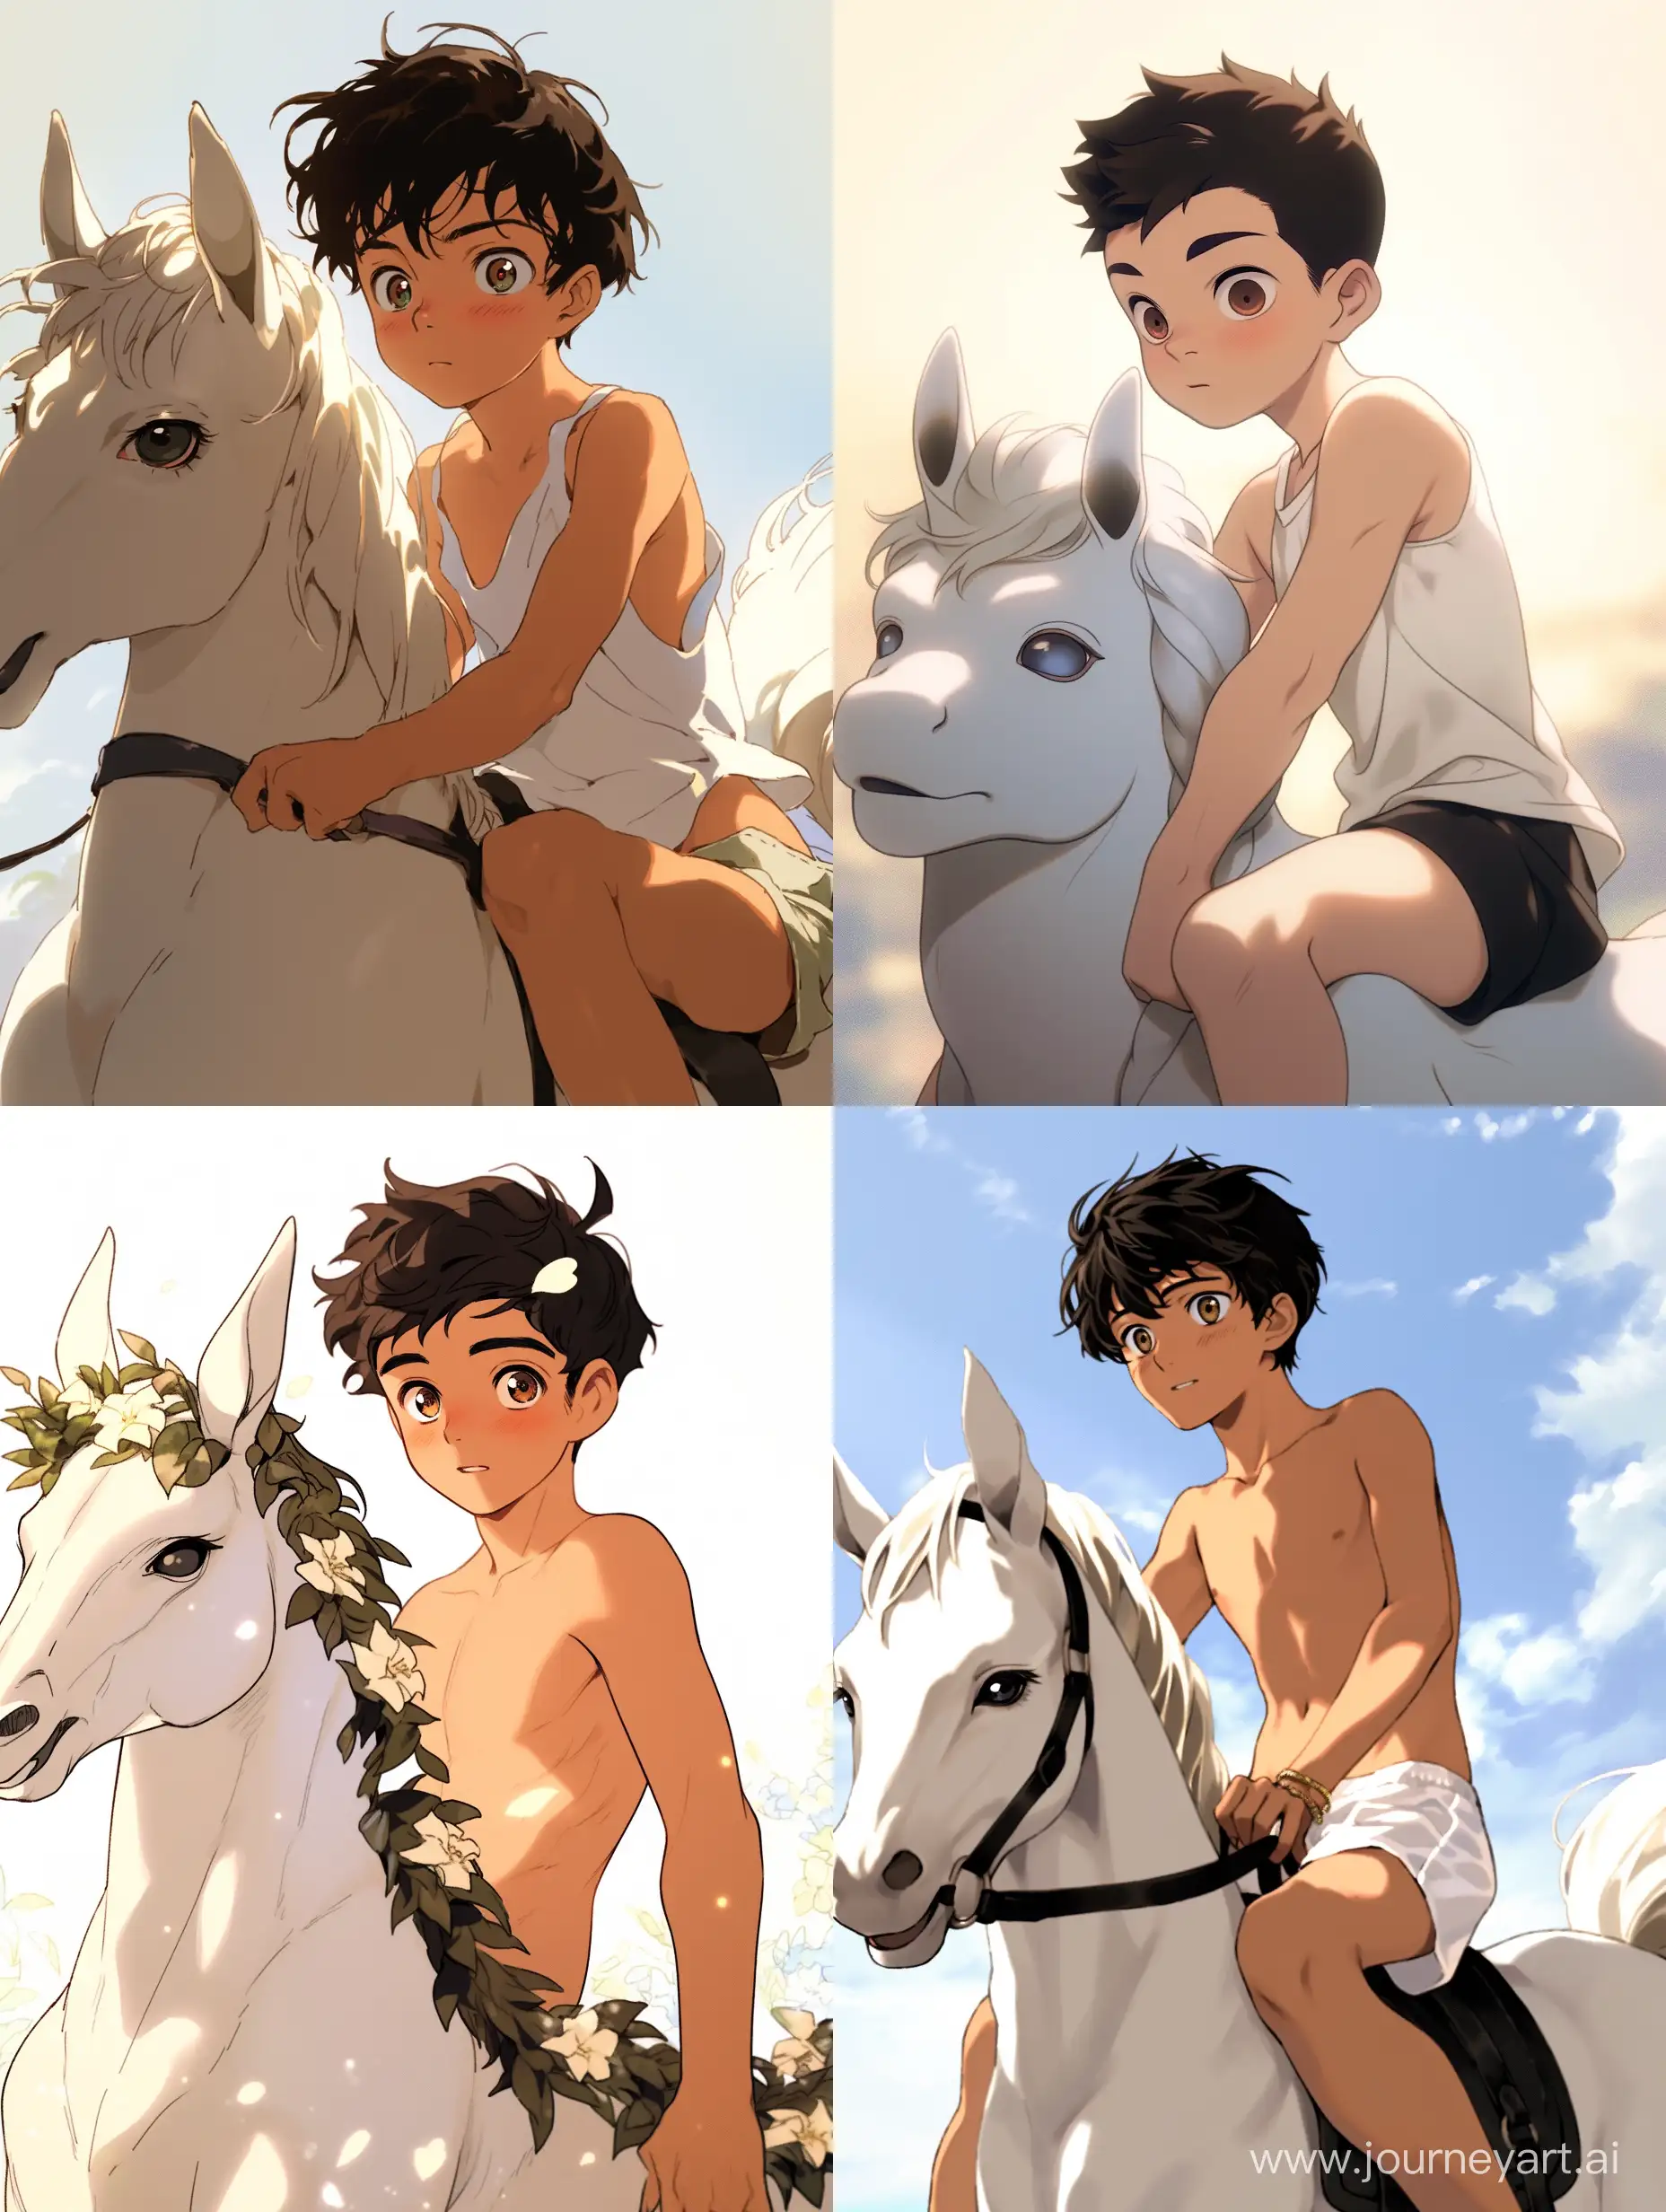 Adorable-Young-Centaur-Boy-in-Cinematic-Anime-Style